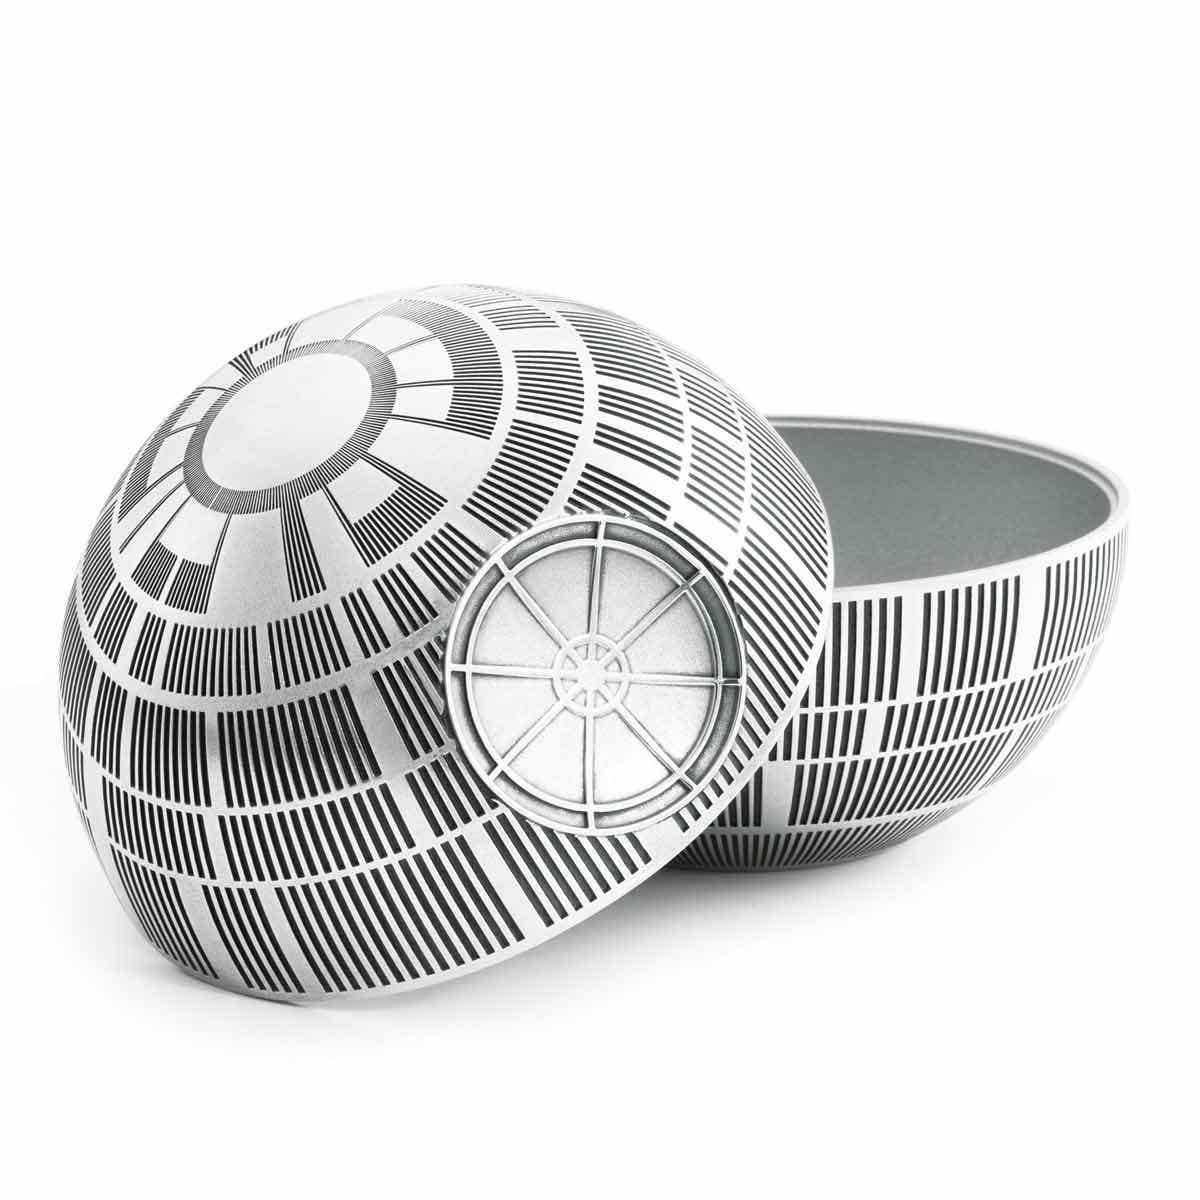 Royal Selangor Star Wars Death Star Container - Pewter